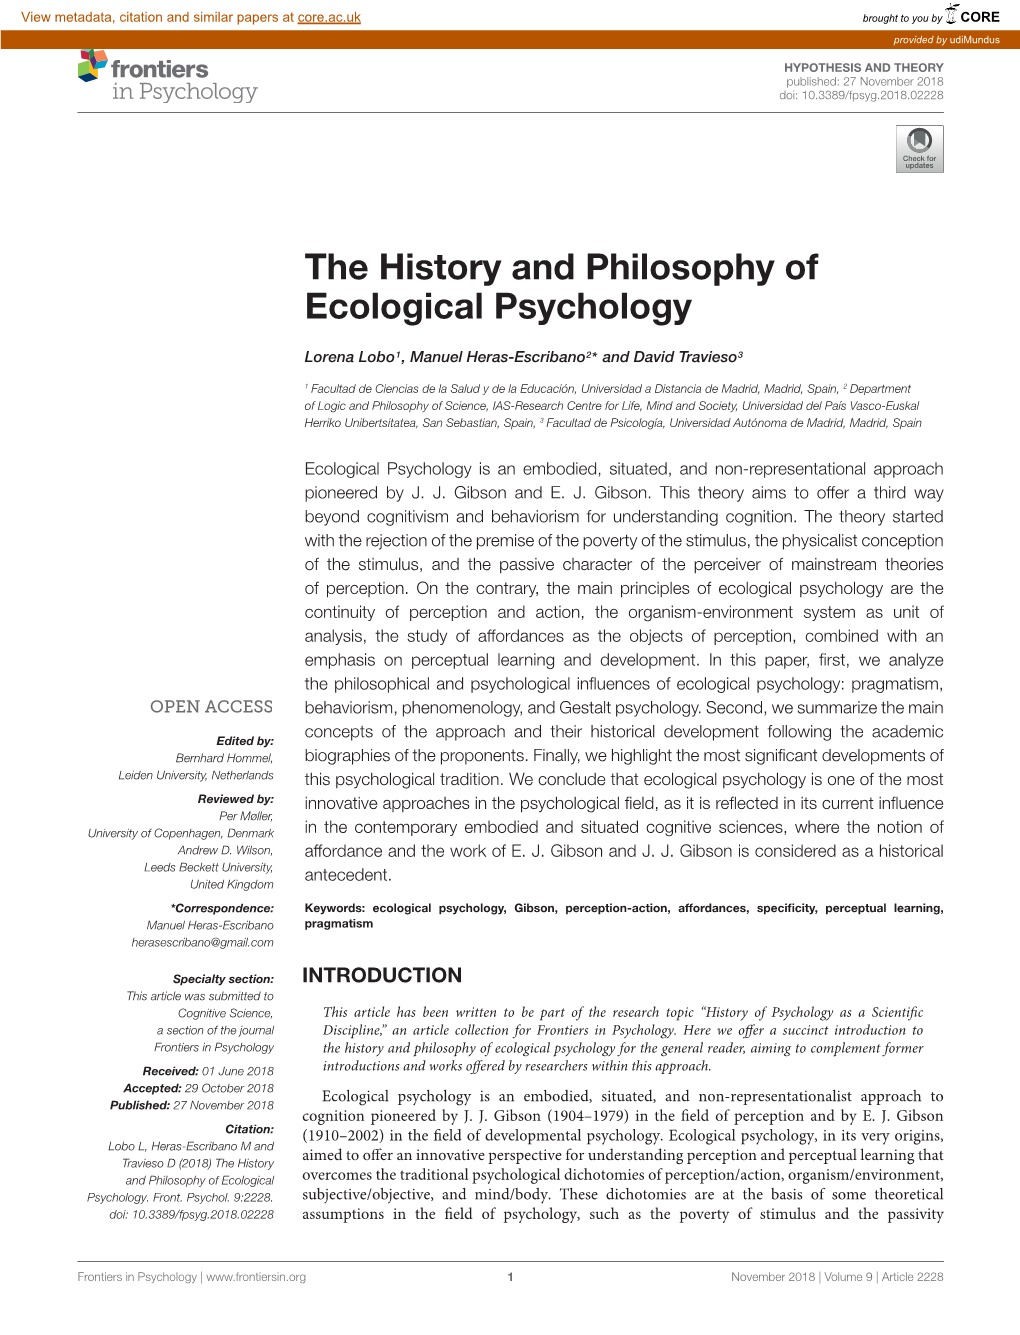 The History and Philosophy of Ecological Psychology